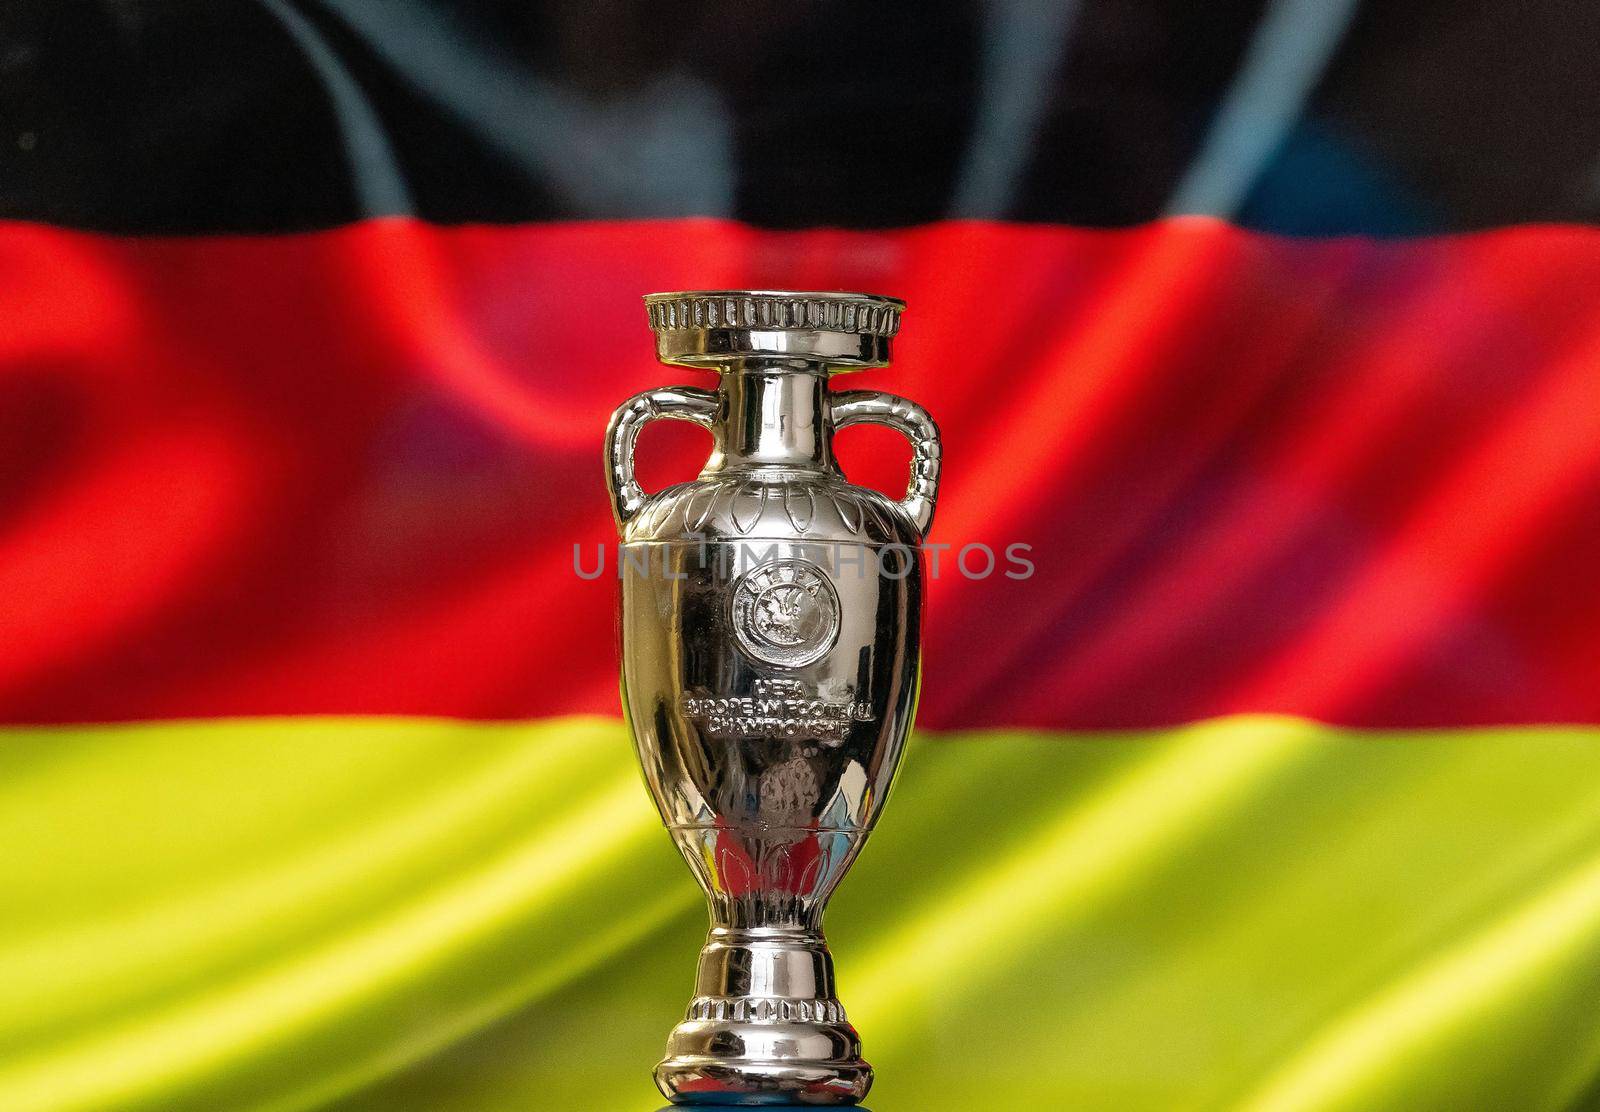 April 10, 2021. Munich, Germany. UEFA European Championship Cup with the German flag in the background.